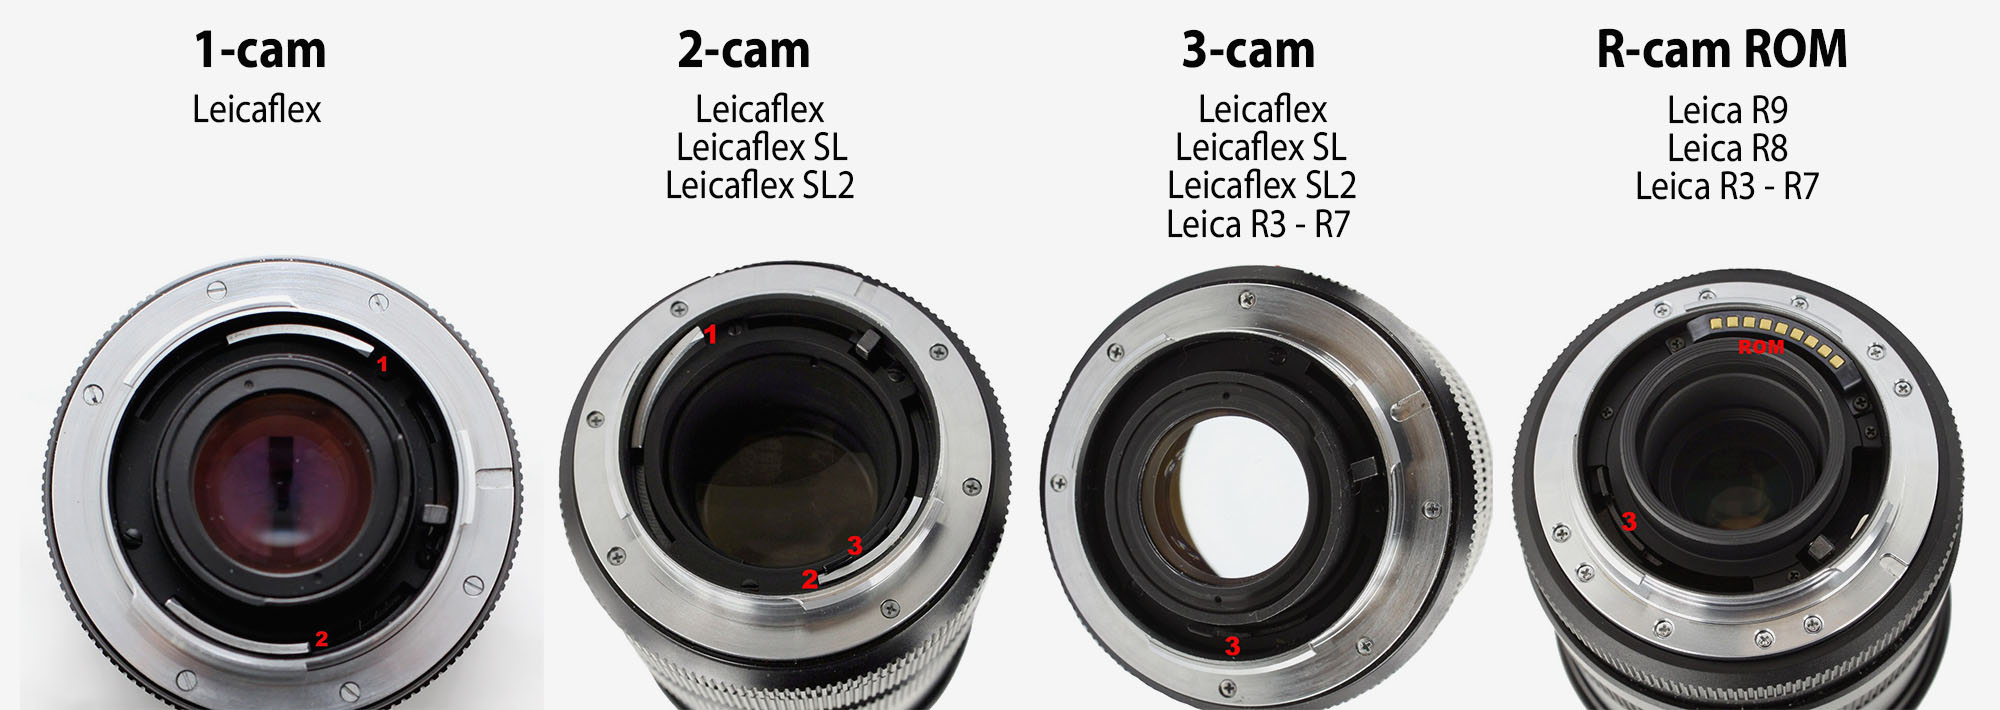 Cam = A Leica transmission system for the Leica R lenses, seen as metal parts inside the lens bayonet. (A cam is a rotating part in machinery, designed to